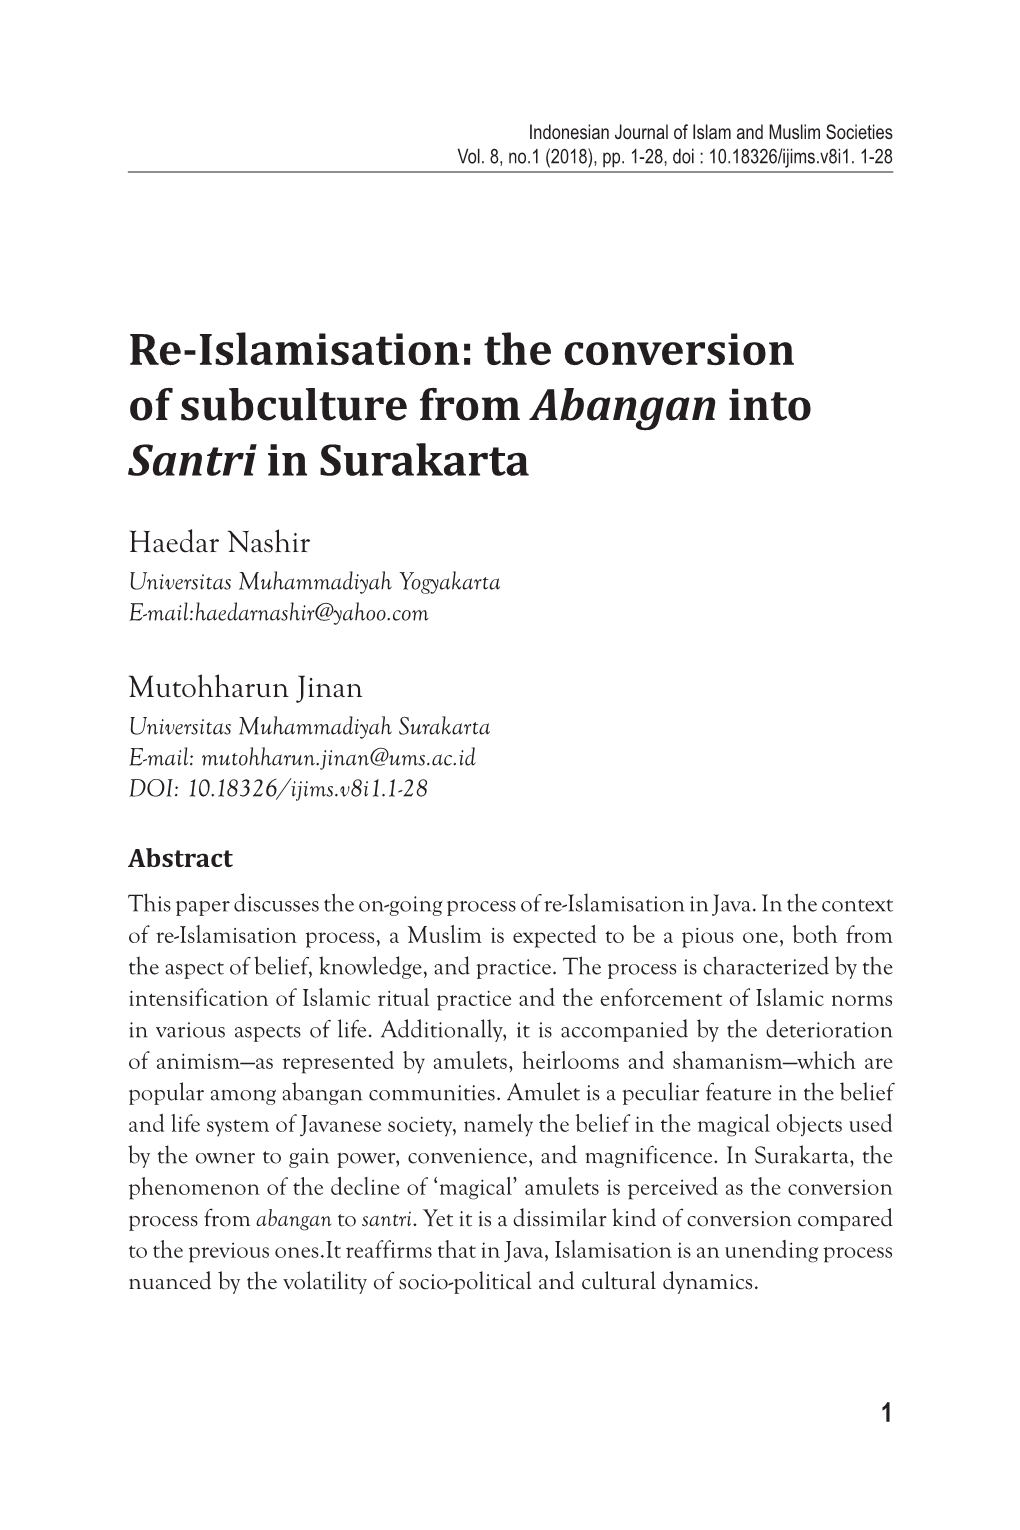 The Conversion of Subculture from Abangan Into Santri in Surakarta